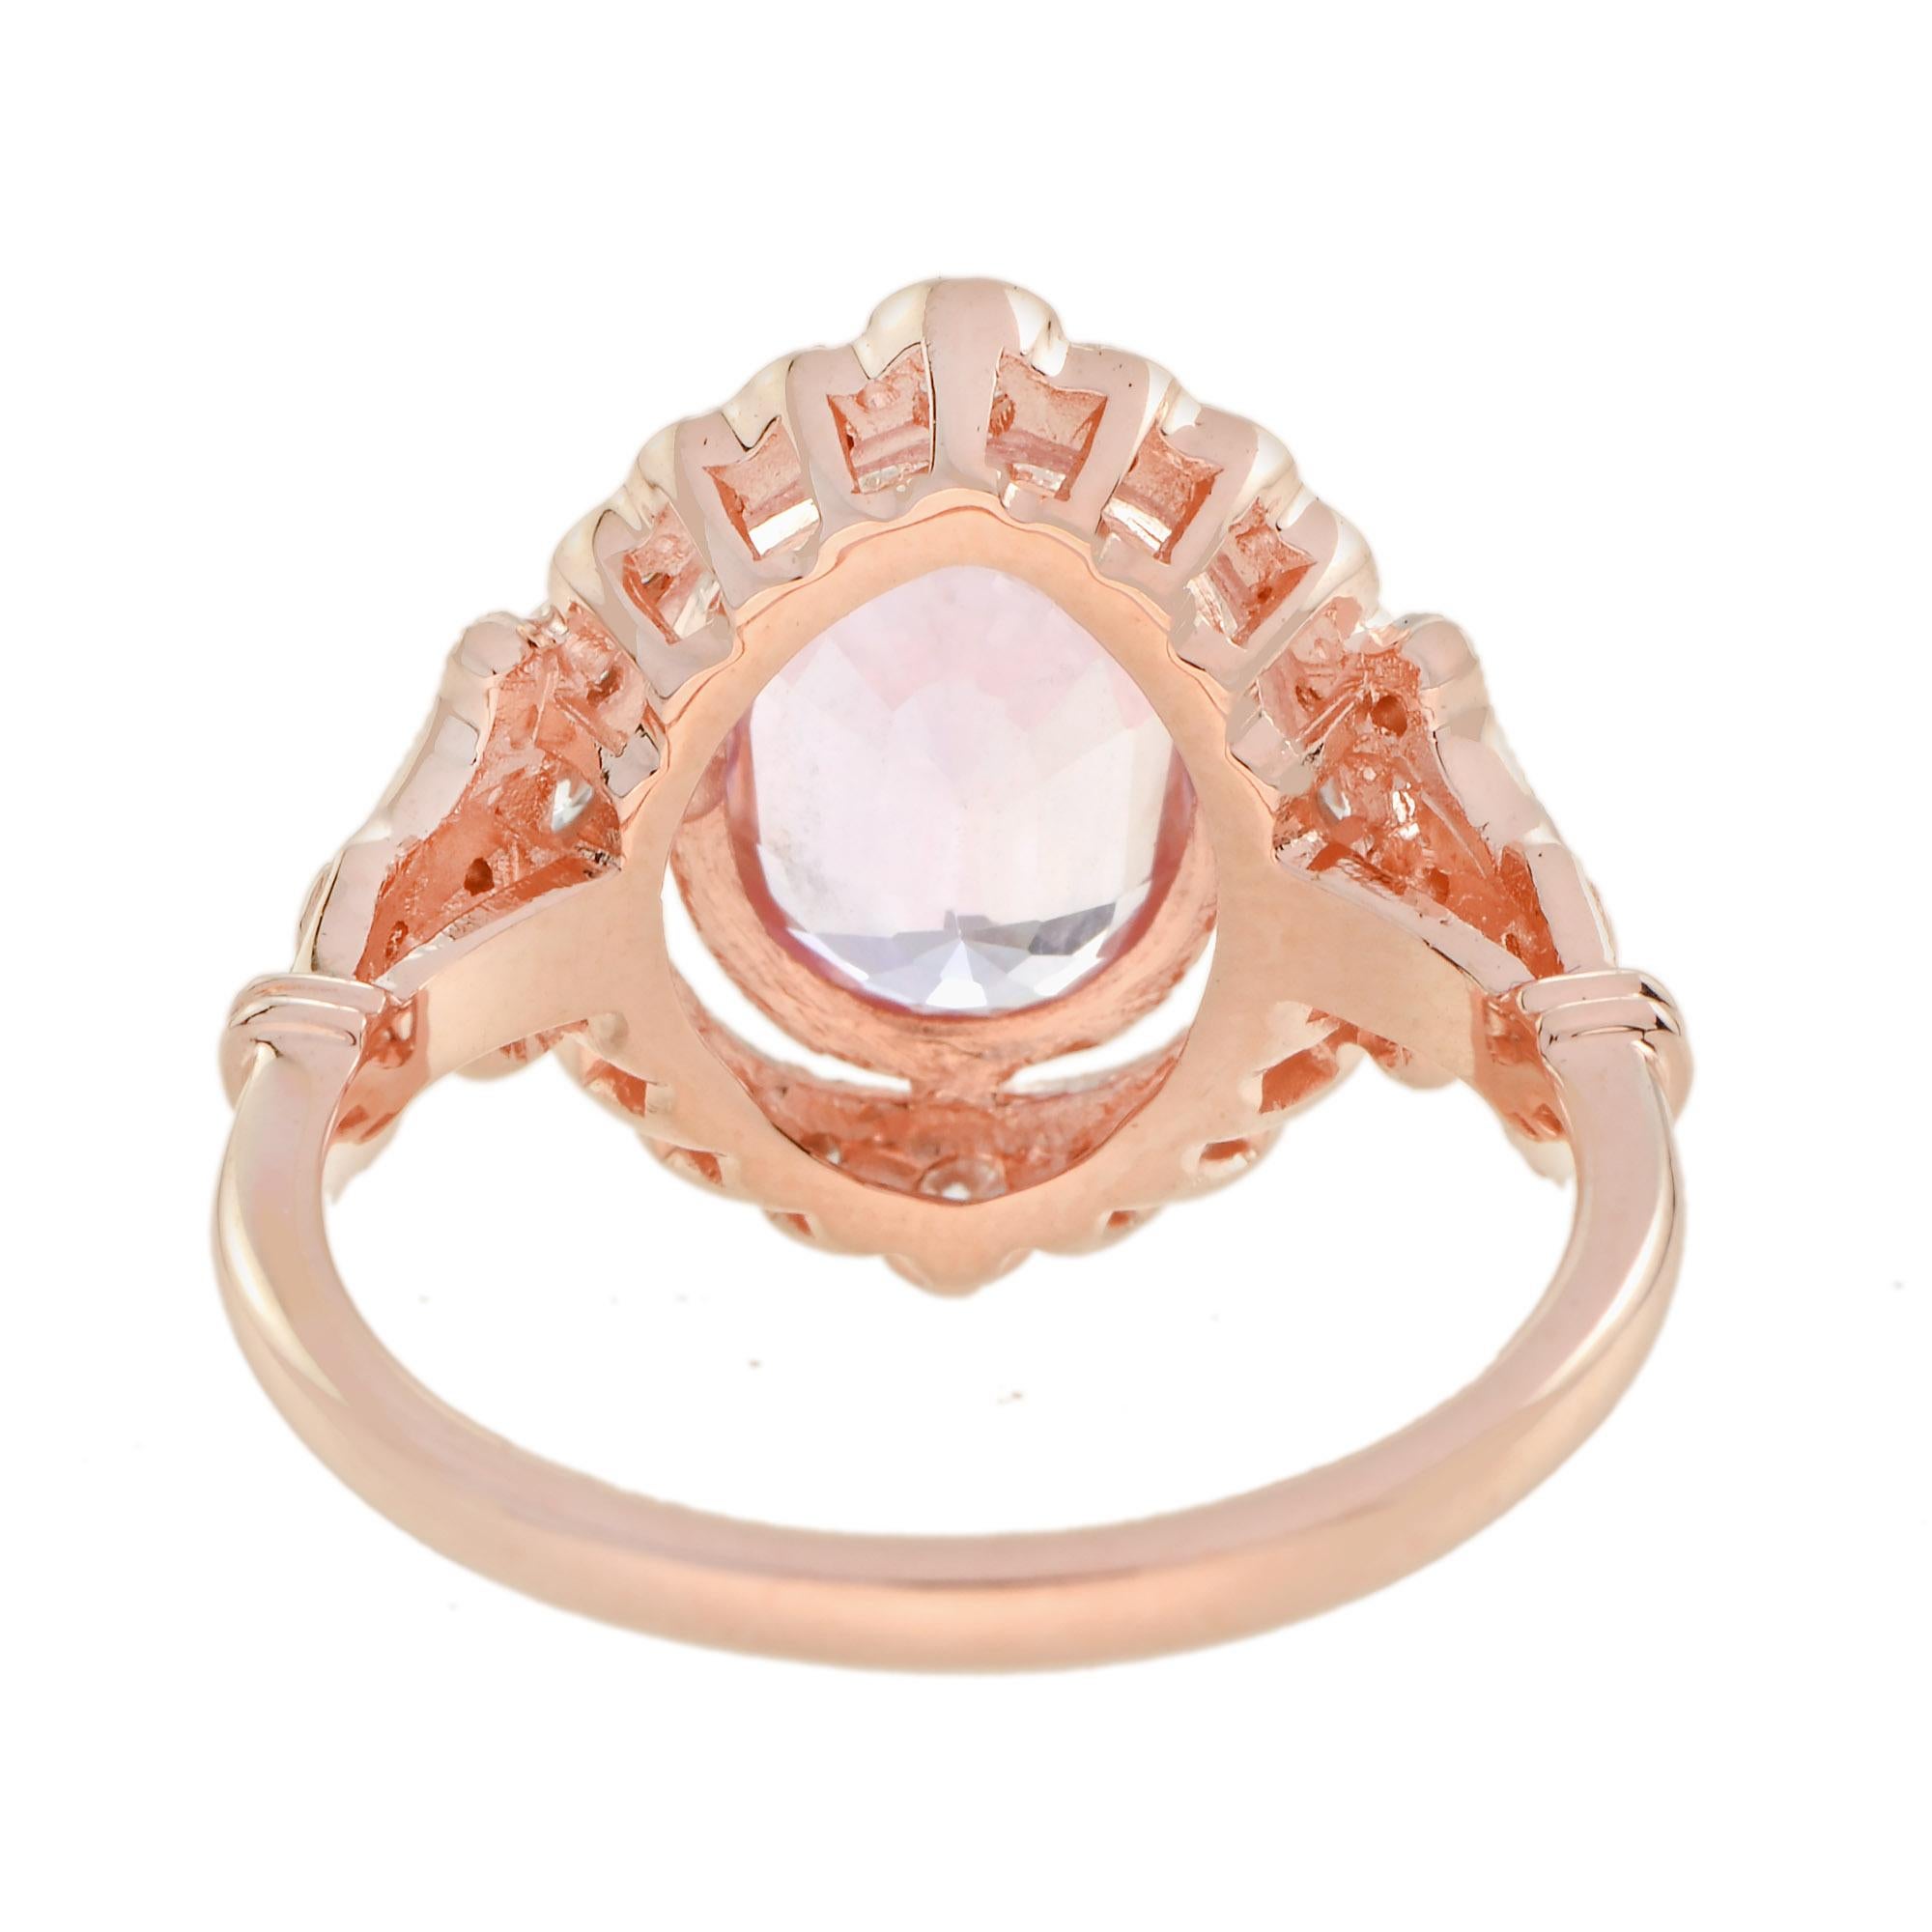 For Sale:  2.50 Ct. Morganite Diamond Vintage Style Halo Engagement Ring in 18K Rose Gold 5